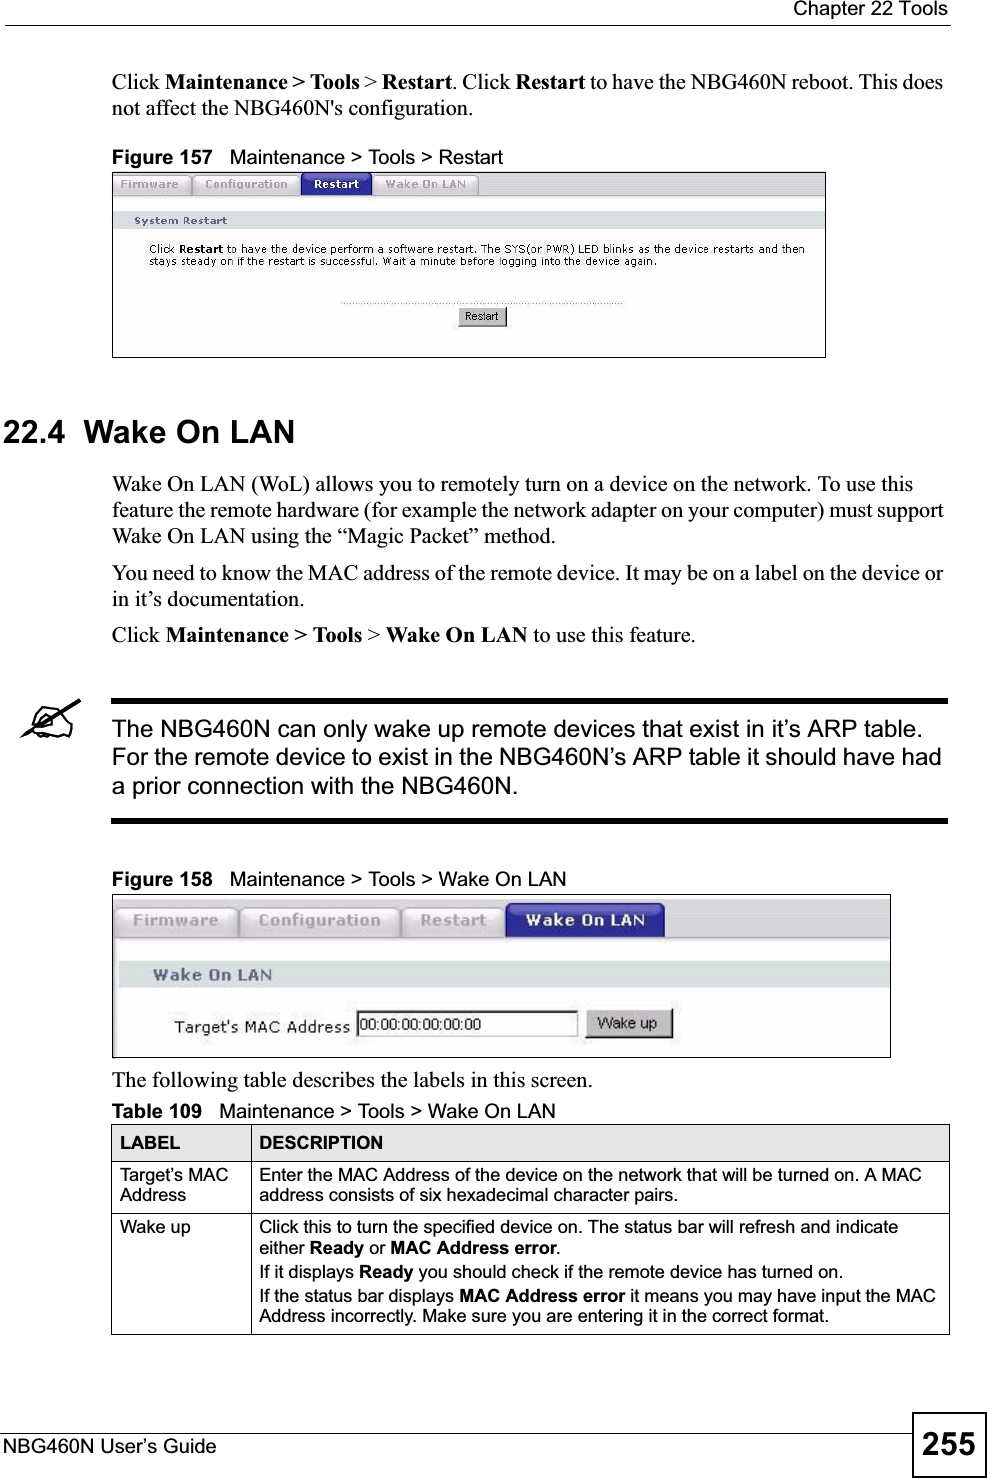  Chapter 22 ToolsNBG460N User’s Guide 255Click Maintenance &gt; Tools &gt; Restart. Click Restart to have the NBG460N reboot. This does not affect the NBG460N&apos;s configuration.Figure 157   Maintenance &gt; Tools &gt; Restart 22.4  Wake On LANWake On LAN (WoL) allows you to remotely turn on a device on the network. To use this feature the remote hardware (for example the network adapter on your computer) must support Wake On LAN using the “Magic Packet” method.You need to know the MAC address of the remote device. It may be on a label on the device or in it’s documentation.Click Maintenance &gt; Tools &gt; Wake On LAN to use this feature.&quot;The NBG460N can only wake up remote devices that exist in it’s ARP table. For the remote device to exist in the NBG460N’s ARP table it should have had a prior connection with the NBG460N.Figure 158   Maintenance &gt; Tools &gt; Wake On LAN The following table describes the labels in this screen.Table 109   Maintenance &gt; Tools &gt; Wake On LAN LABEL DESCRIPTIONTarget’s MAC AddressEnter the MAC Address of the device on the network that will be turned on. A MAC address consists of six hexadecimal character pairs.Wake up Click this to turn the specified device on. The status bar will refresh and indicate either Ready or MAC Address error.If it displays Ready you should check if the remote device has turned on.If the status bar displays MAC Address error it means you may have input the MAC Address incorrectly. Make sure you are entering it in the correct format. 